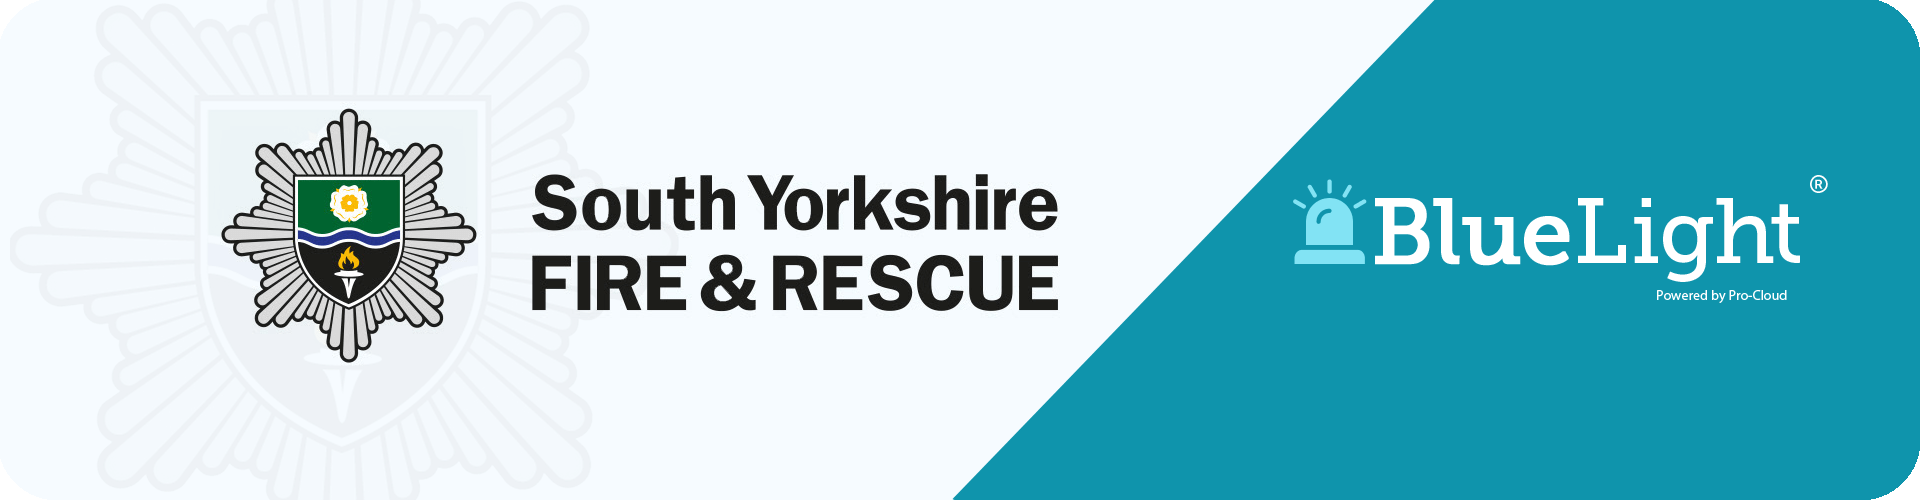 south yorkshire fire and rescue logo with Pro-Cloud bluelight logo